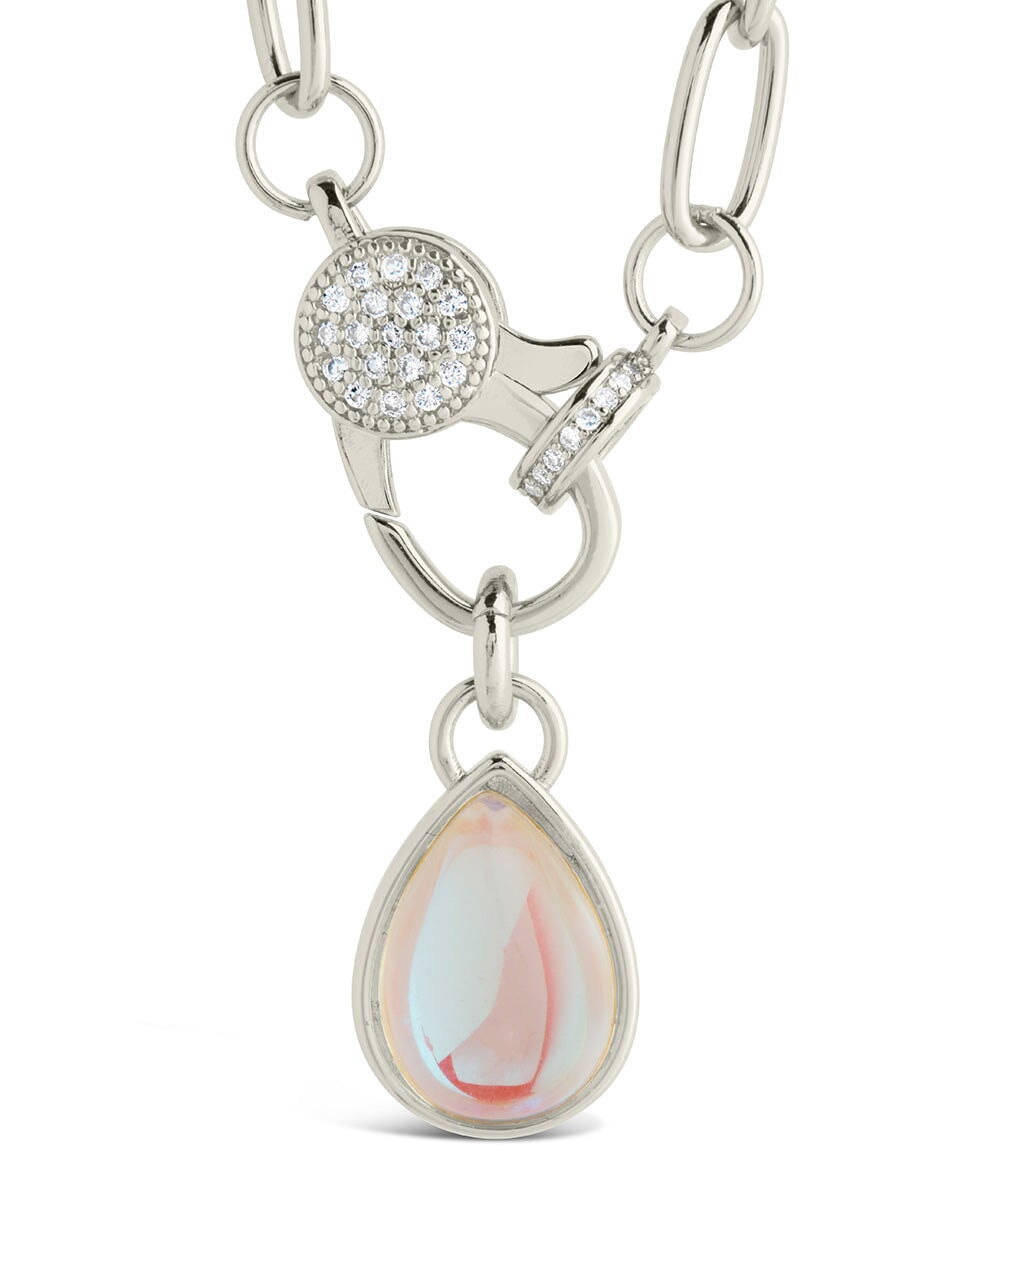 Tay Moonstone Charm & Chain Necklace Necklace Sterling Forever 